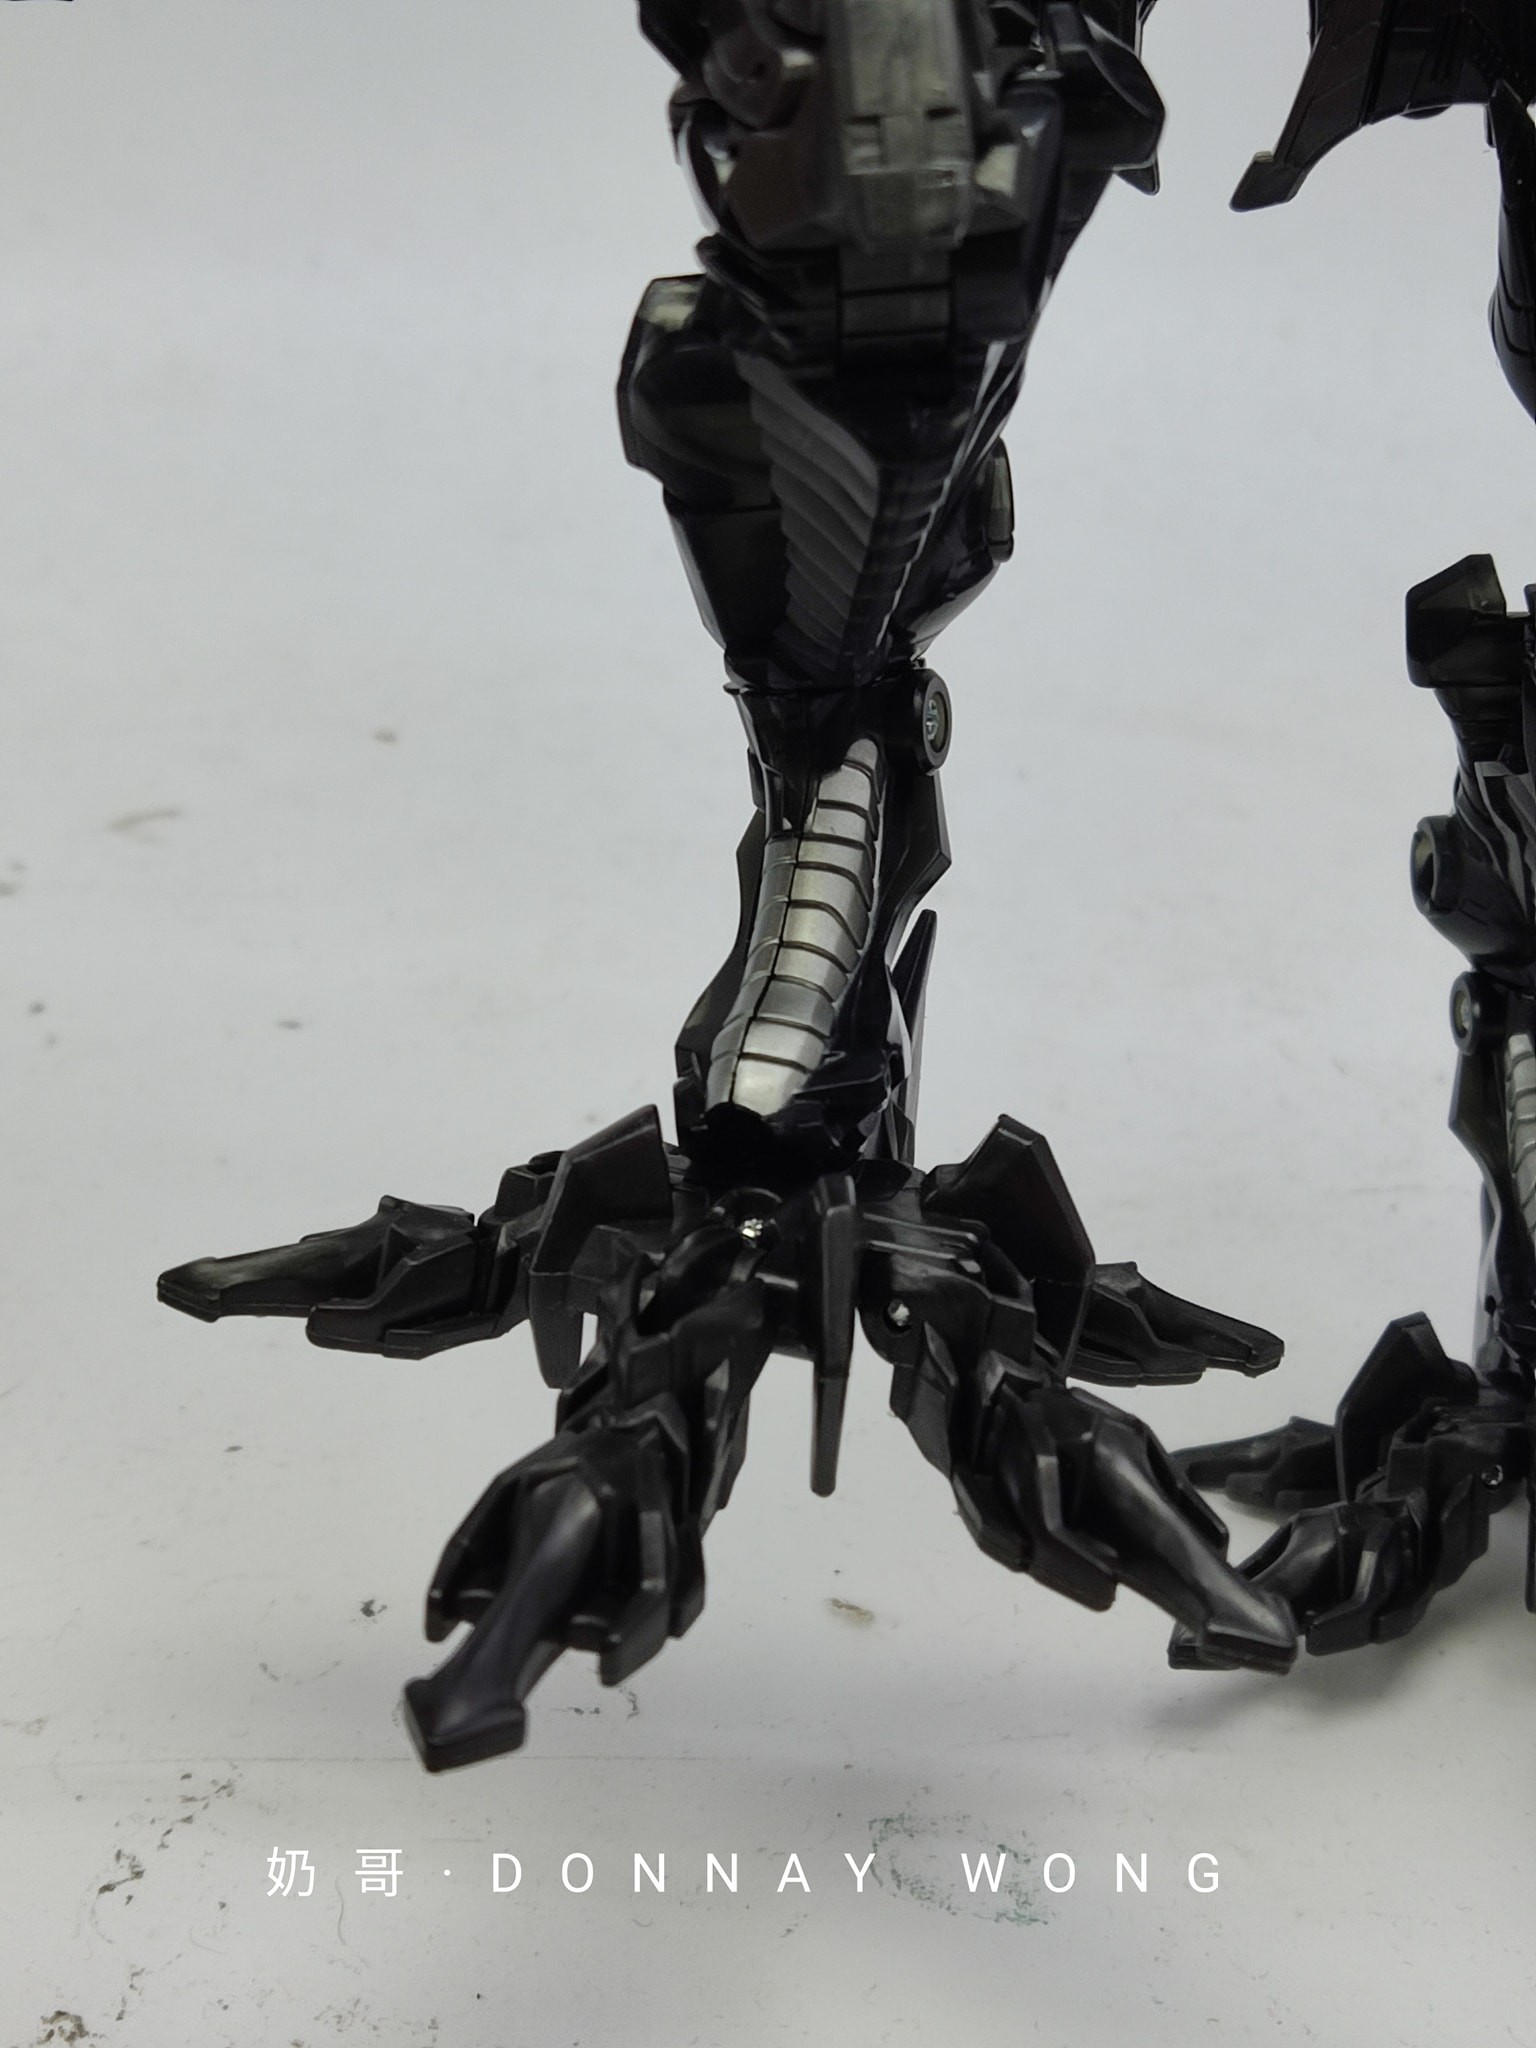 Transformers News: In Hand Images of Transformers Studio Series Leader The Fallen and Core Rumble